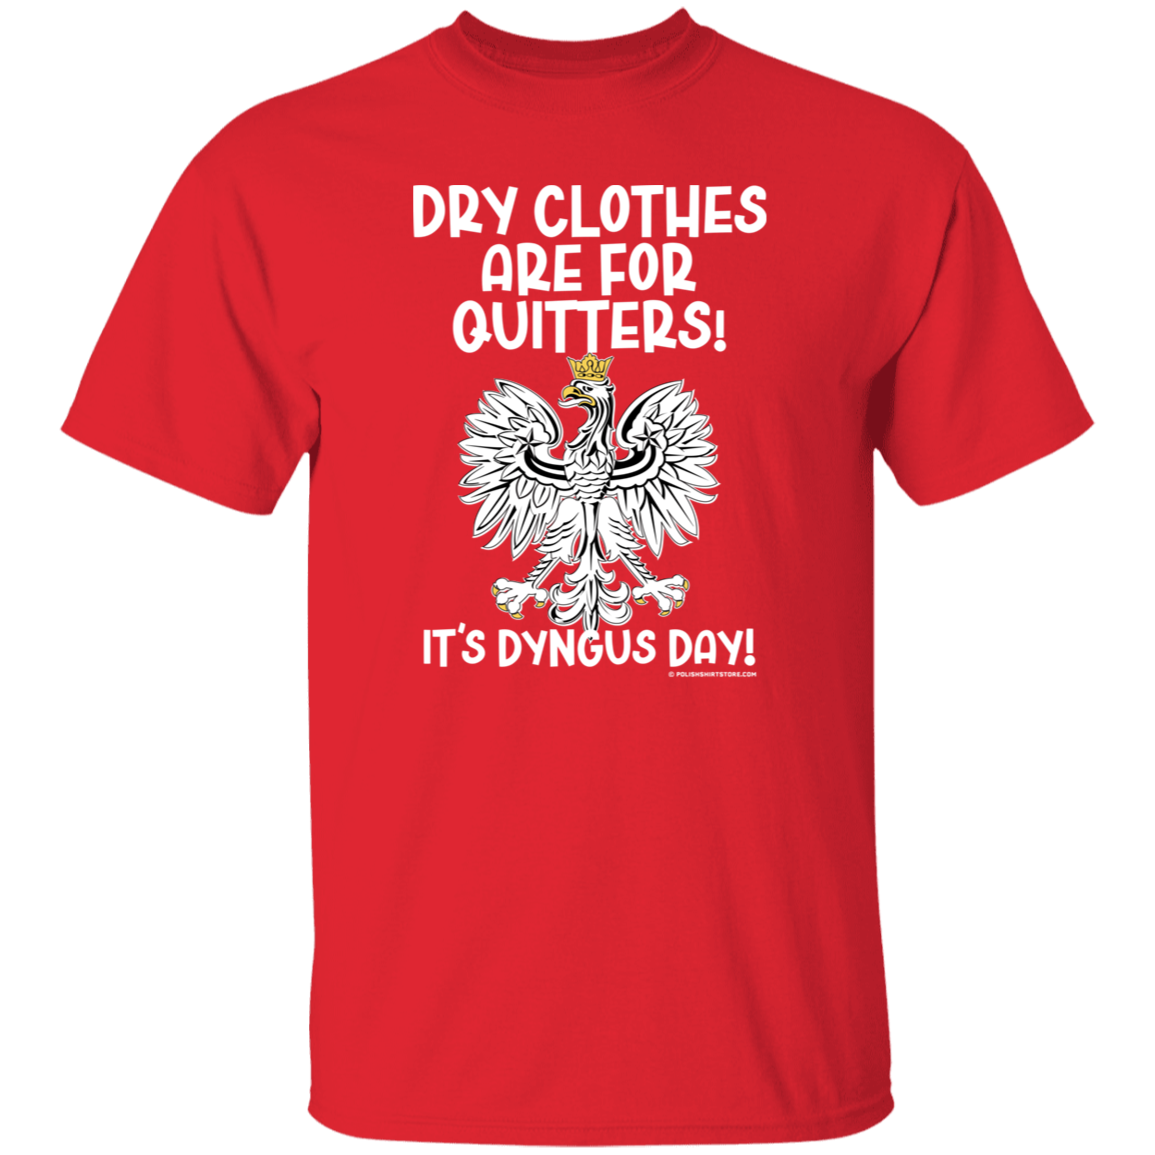 Dry Clothes Are For Quitters Dyngus Day Apparel CustomCat G500 5.3 oz. T-Shirt Red S